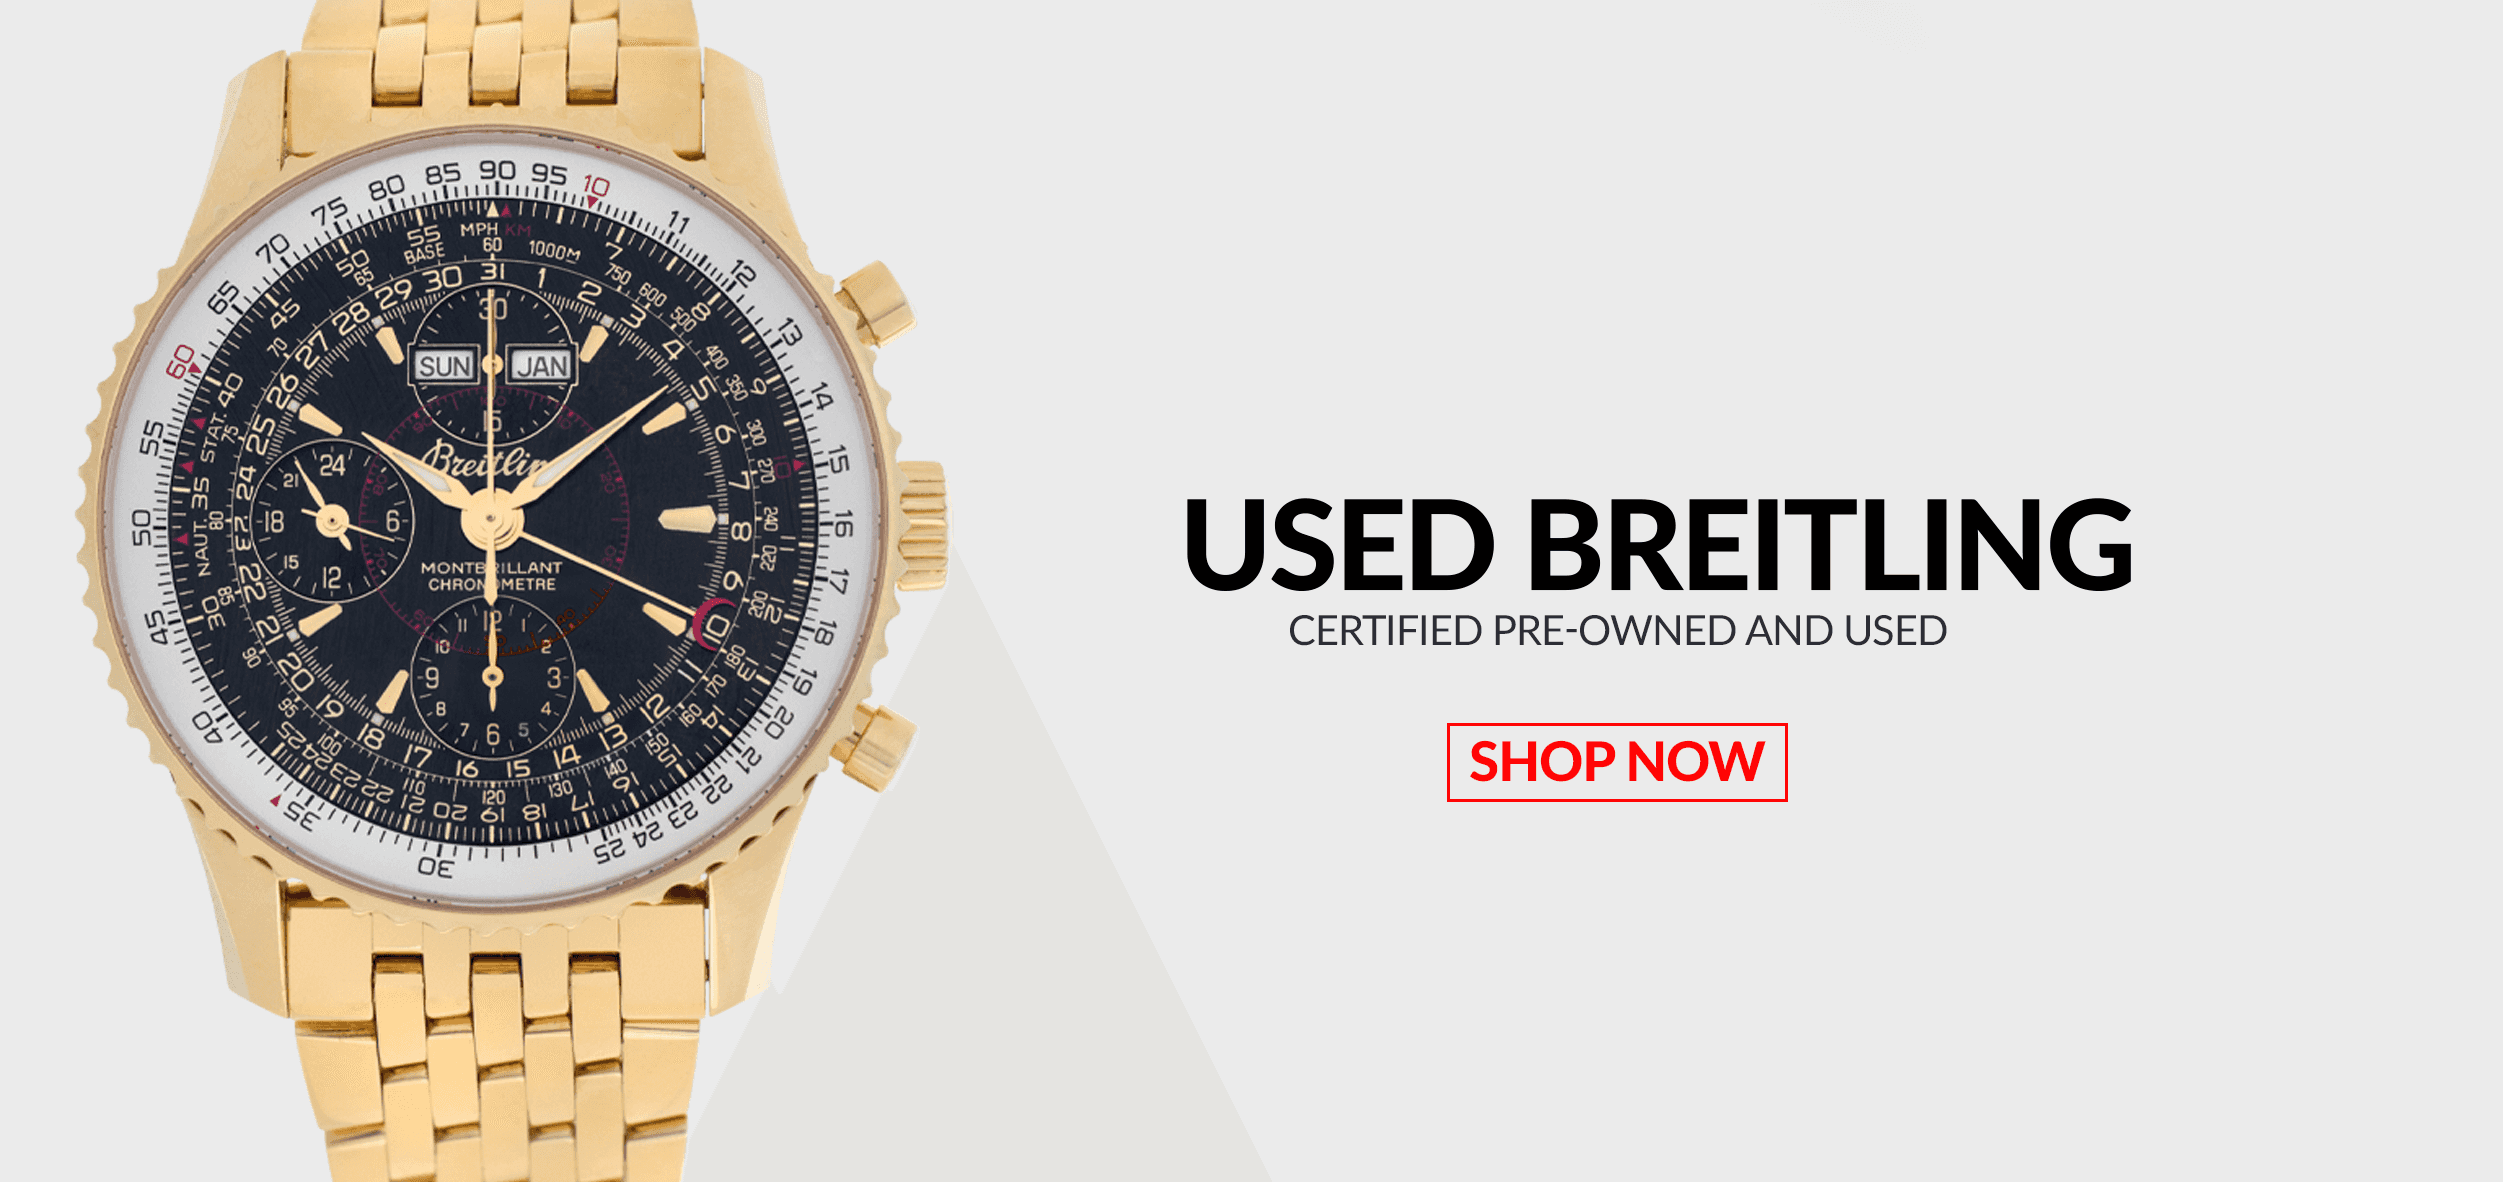 Pre-Owned Certified Used Breitling Watches Header